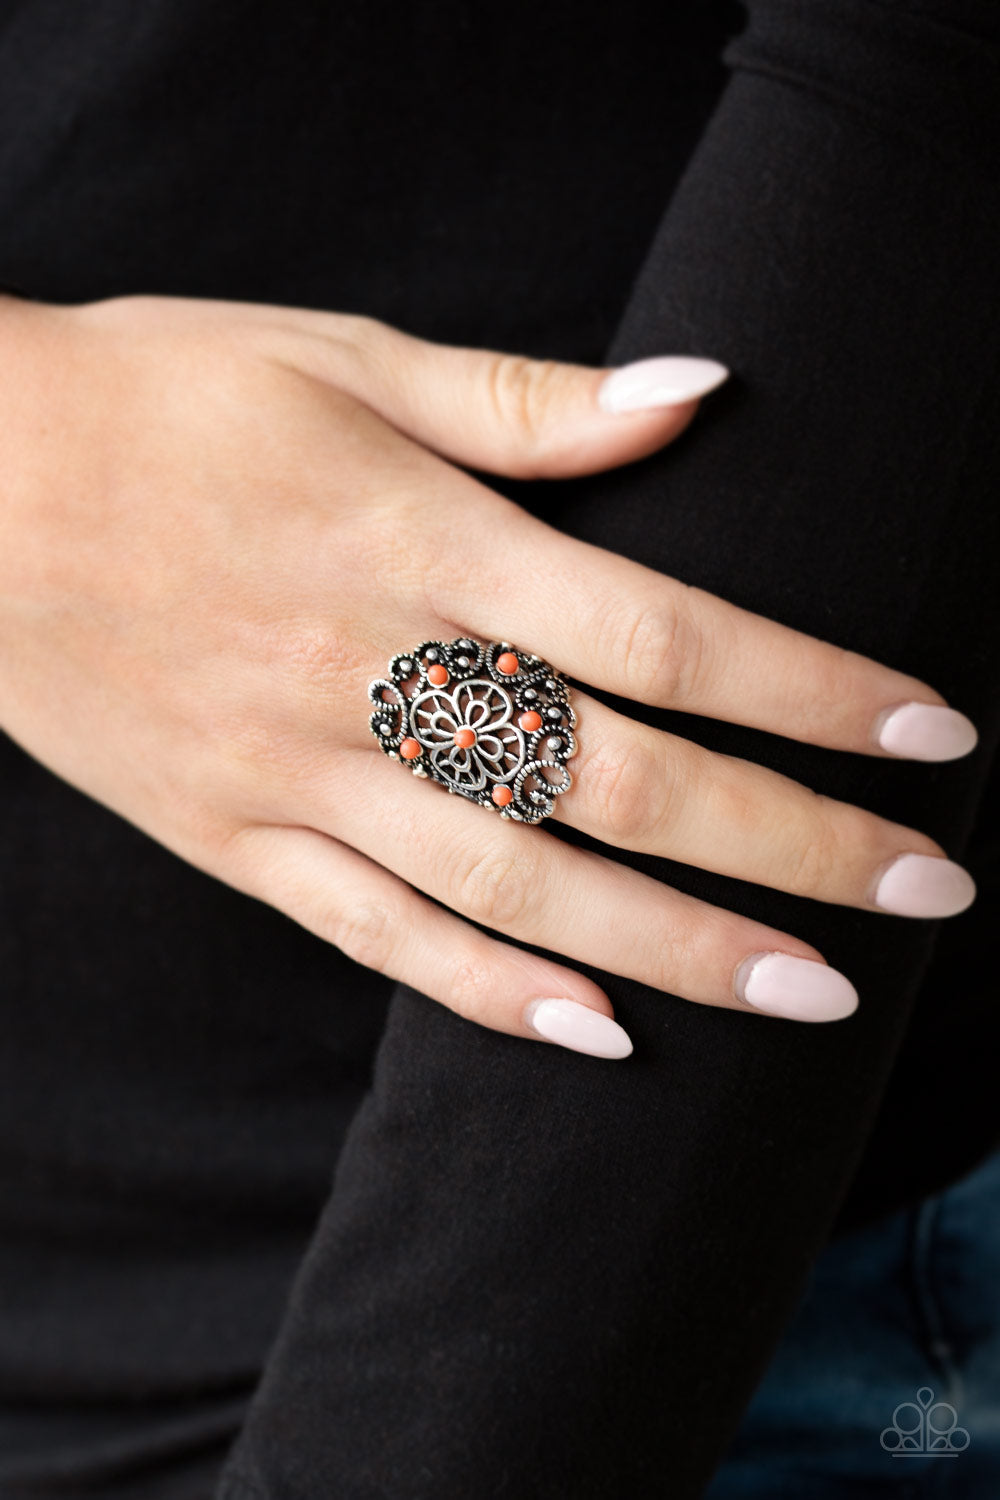 Floral Fancies - Orange and Silver Ring - Paparazzi Accessories - Dainty Living Coral beads are sprinkled across a shimmery frame swirling with silver filigree, creating a whimsical floral frame atop the finger. Features a stretchy band for a flexible fit. Sold as one individual fashion ring.